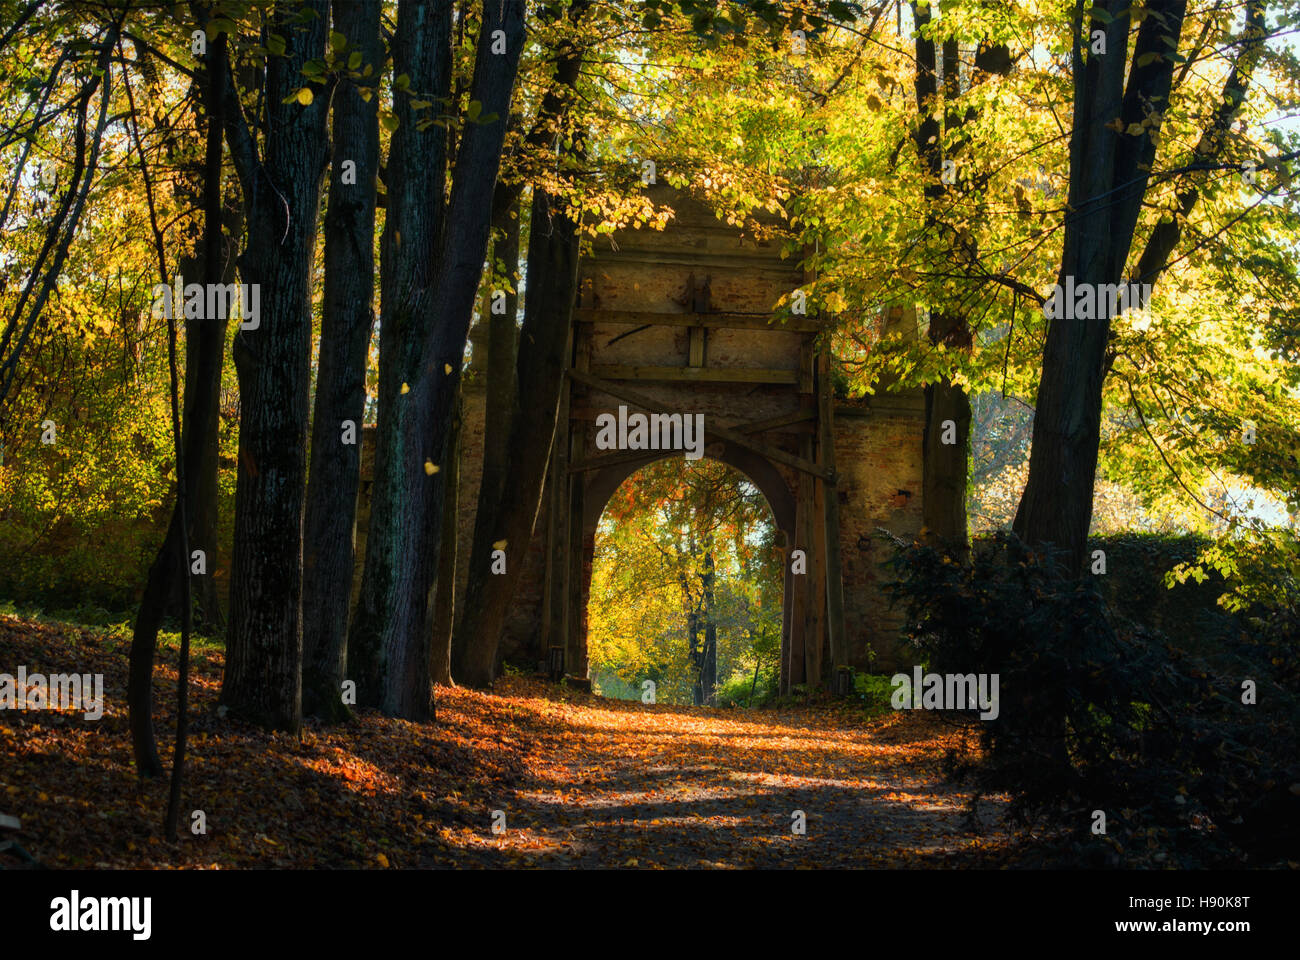 Mysterious gate in the autumn Park. Stock Photo